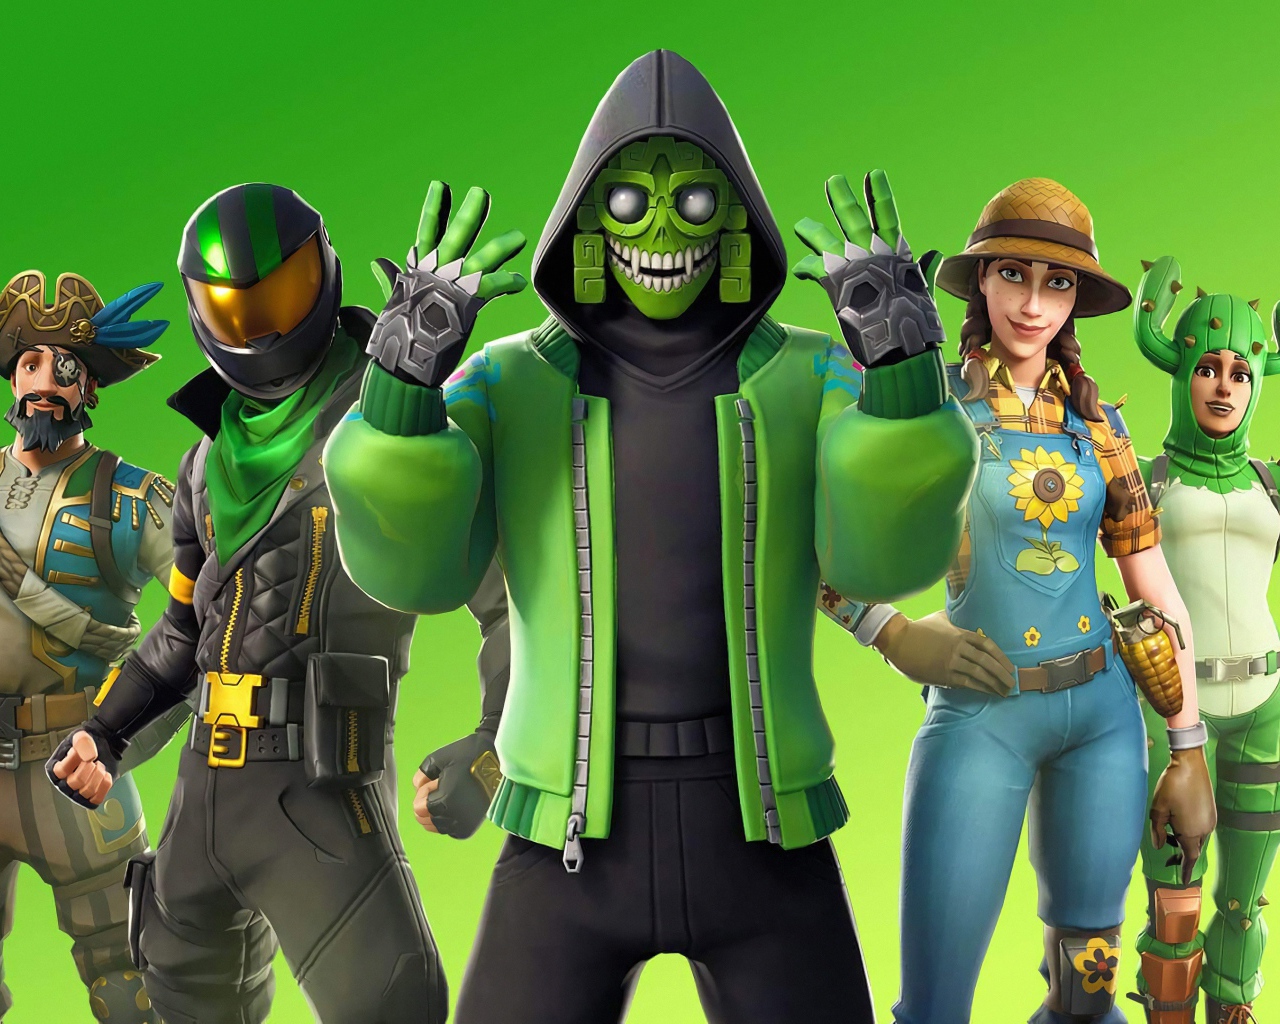 Fortnite 2 computer game characters on green background